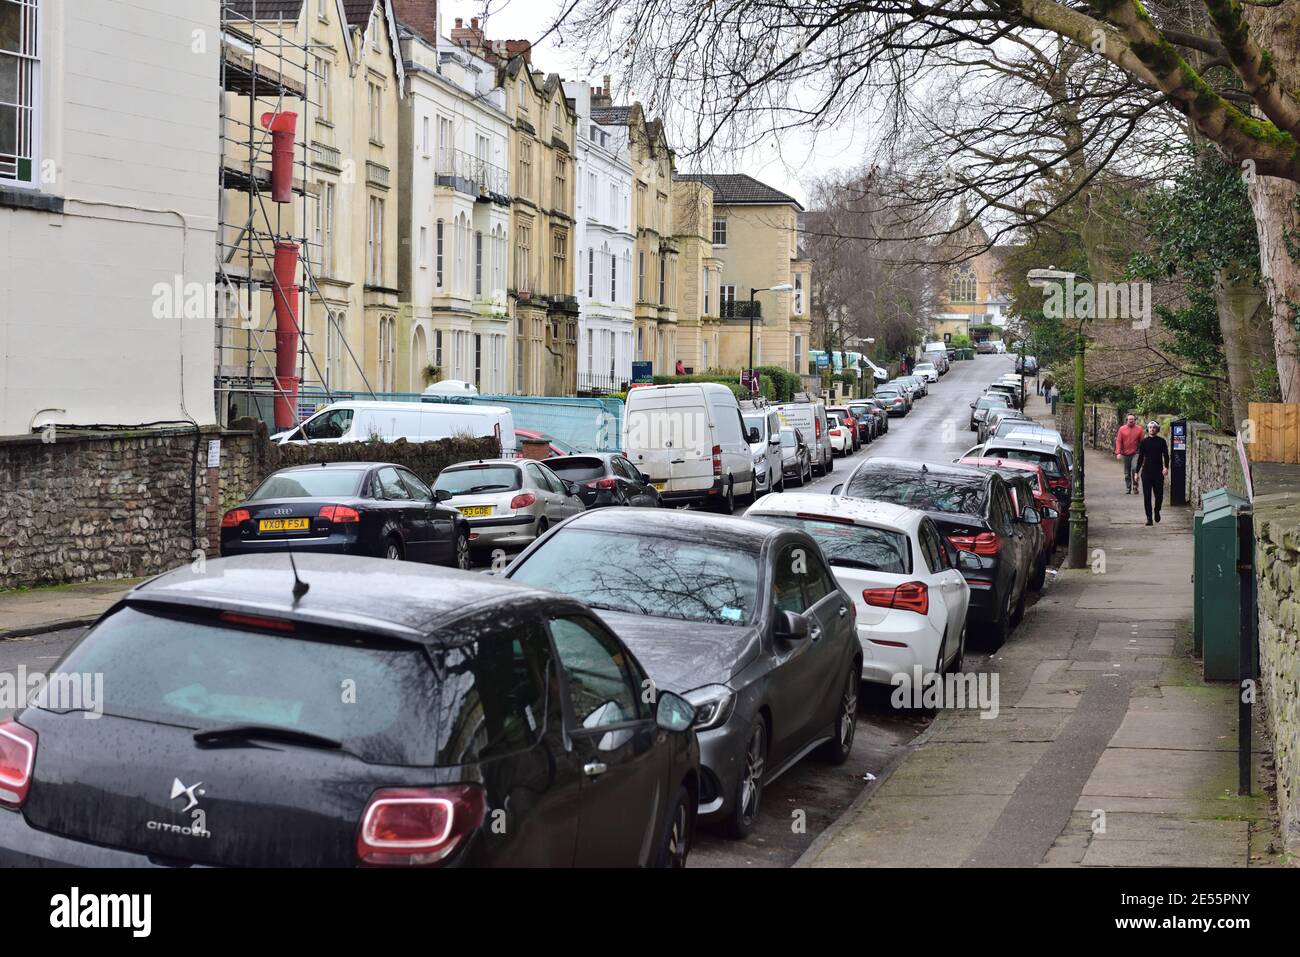 City residential street packed with cars parked on both sides, UK Stock Photo